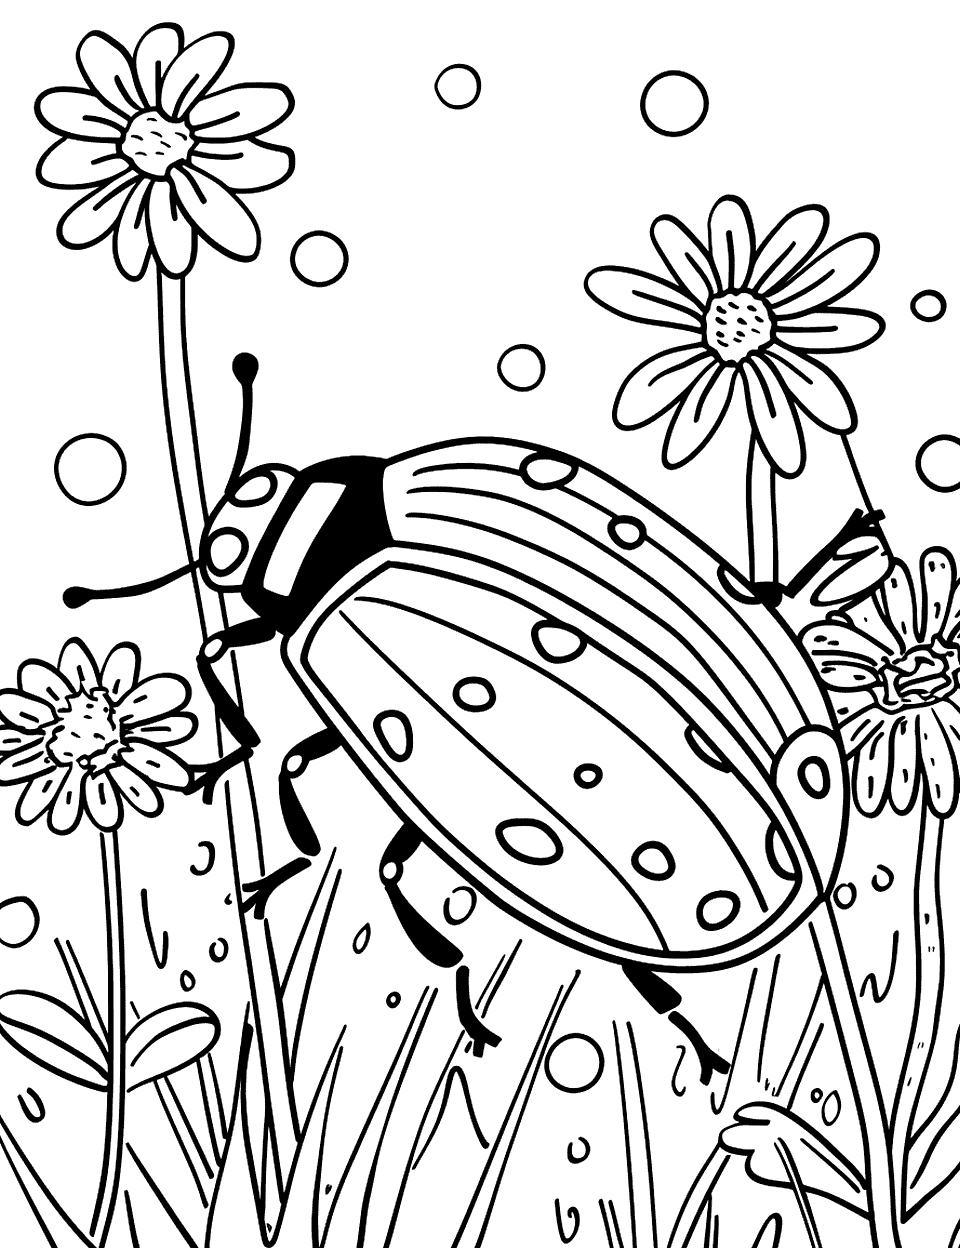 Ladybug Flying in the Garden Insect Coloring Page - A ladybug flitting between flowers in a garden.